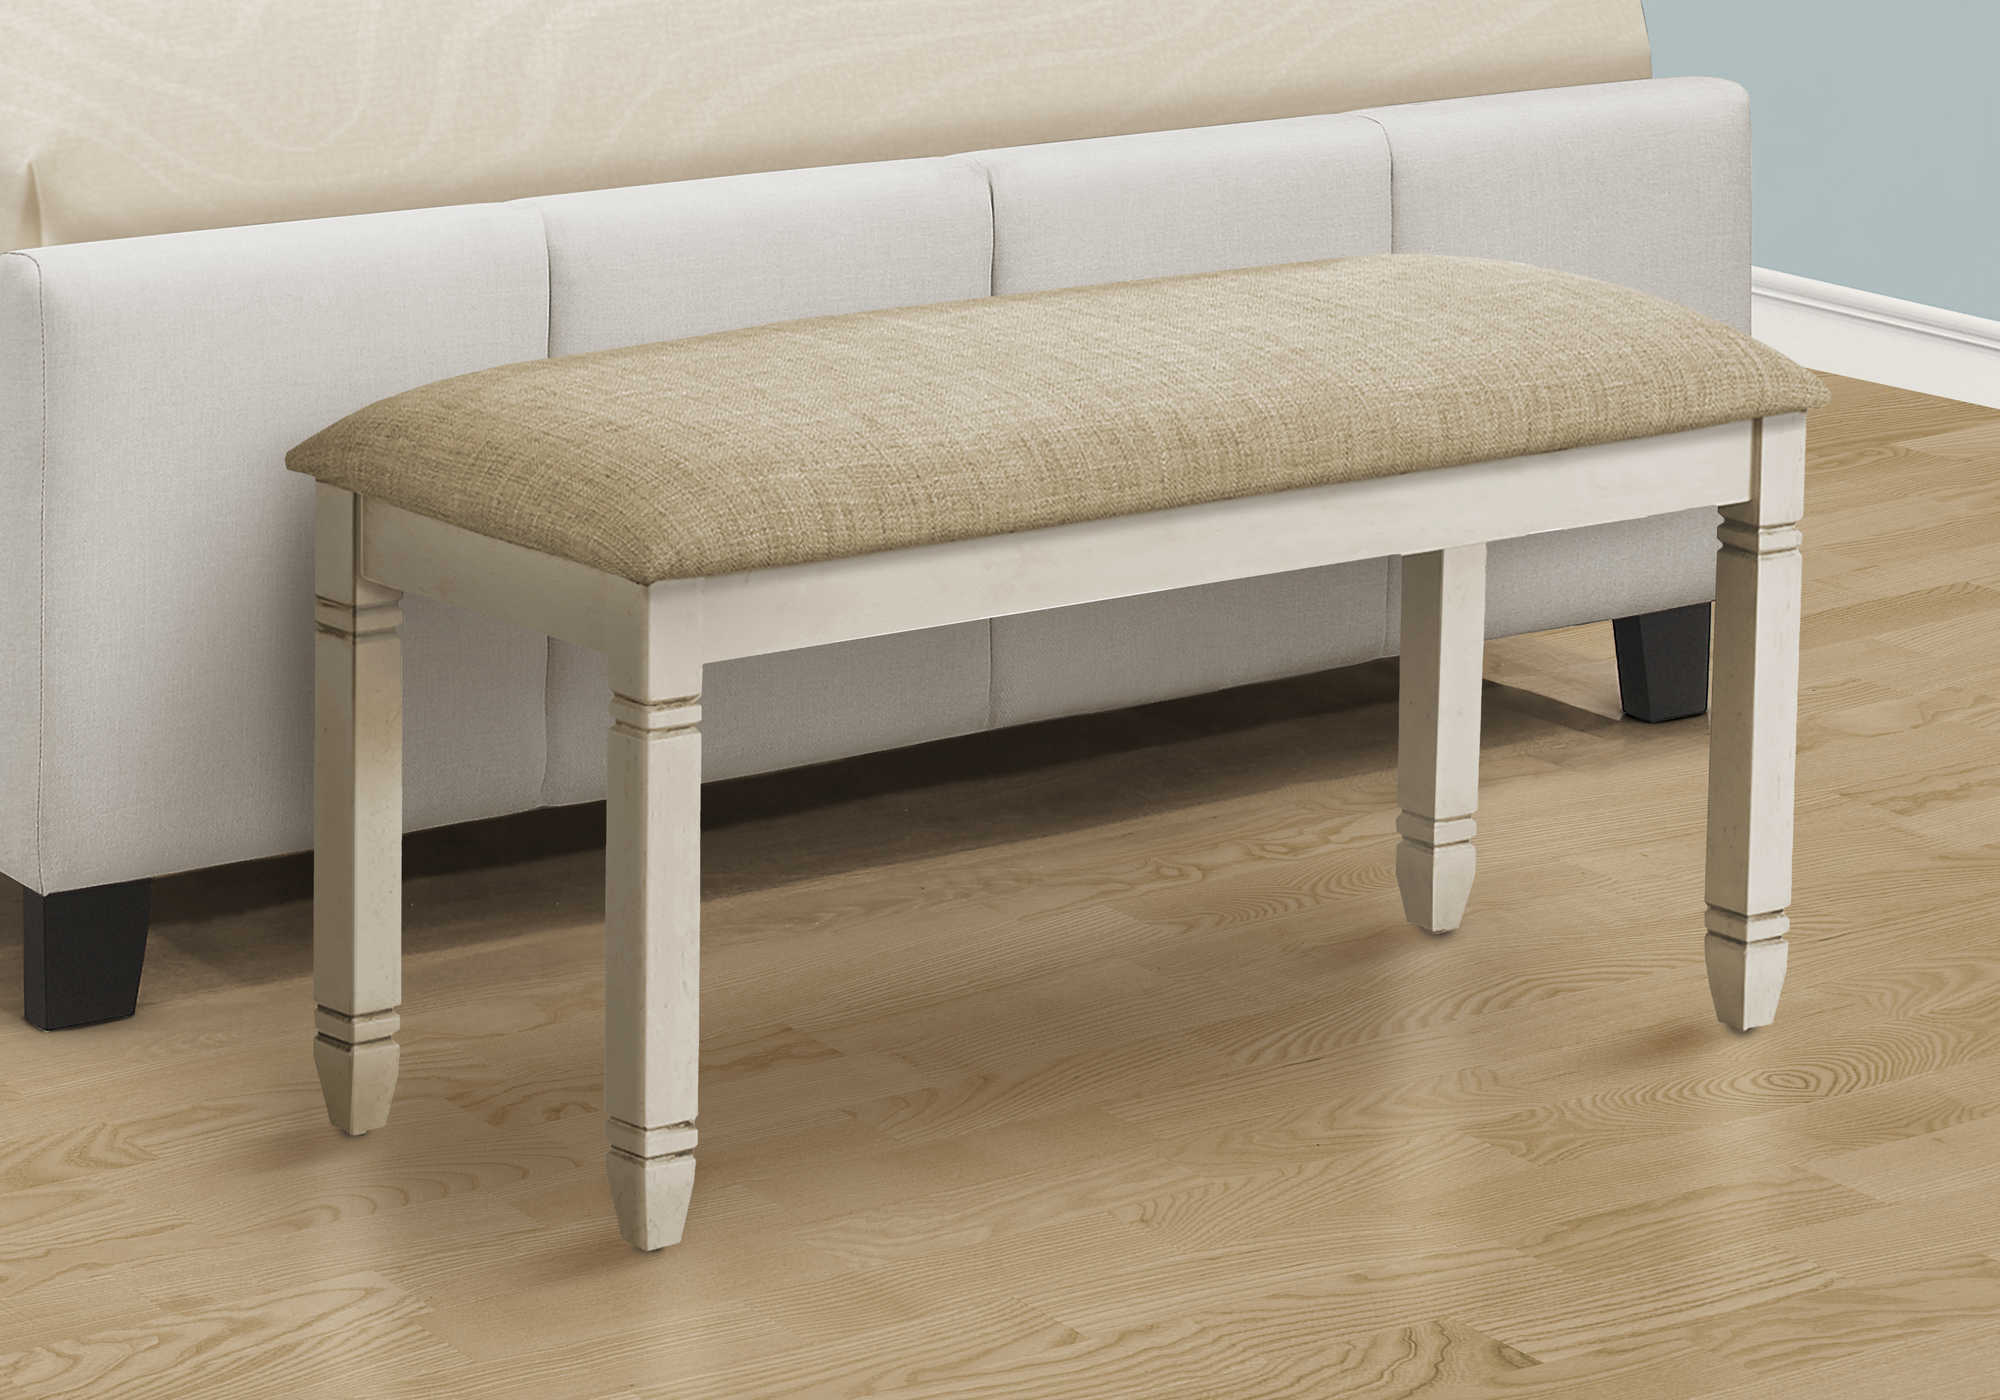 BENCH - 41"L / UPHOLSTERED BEIGE FABRIC